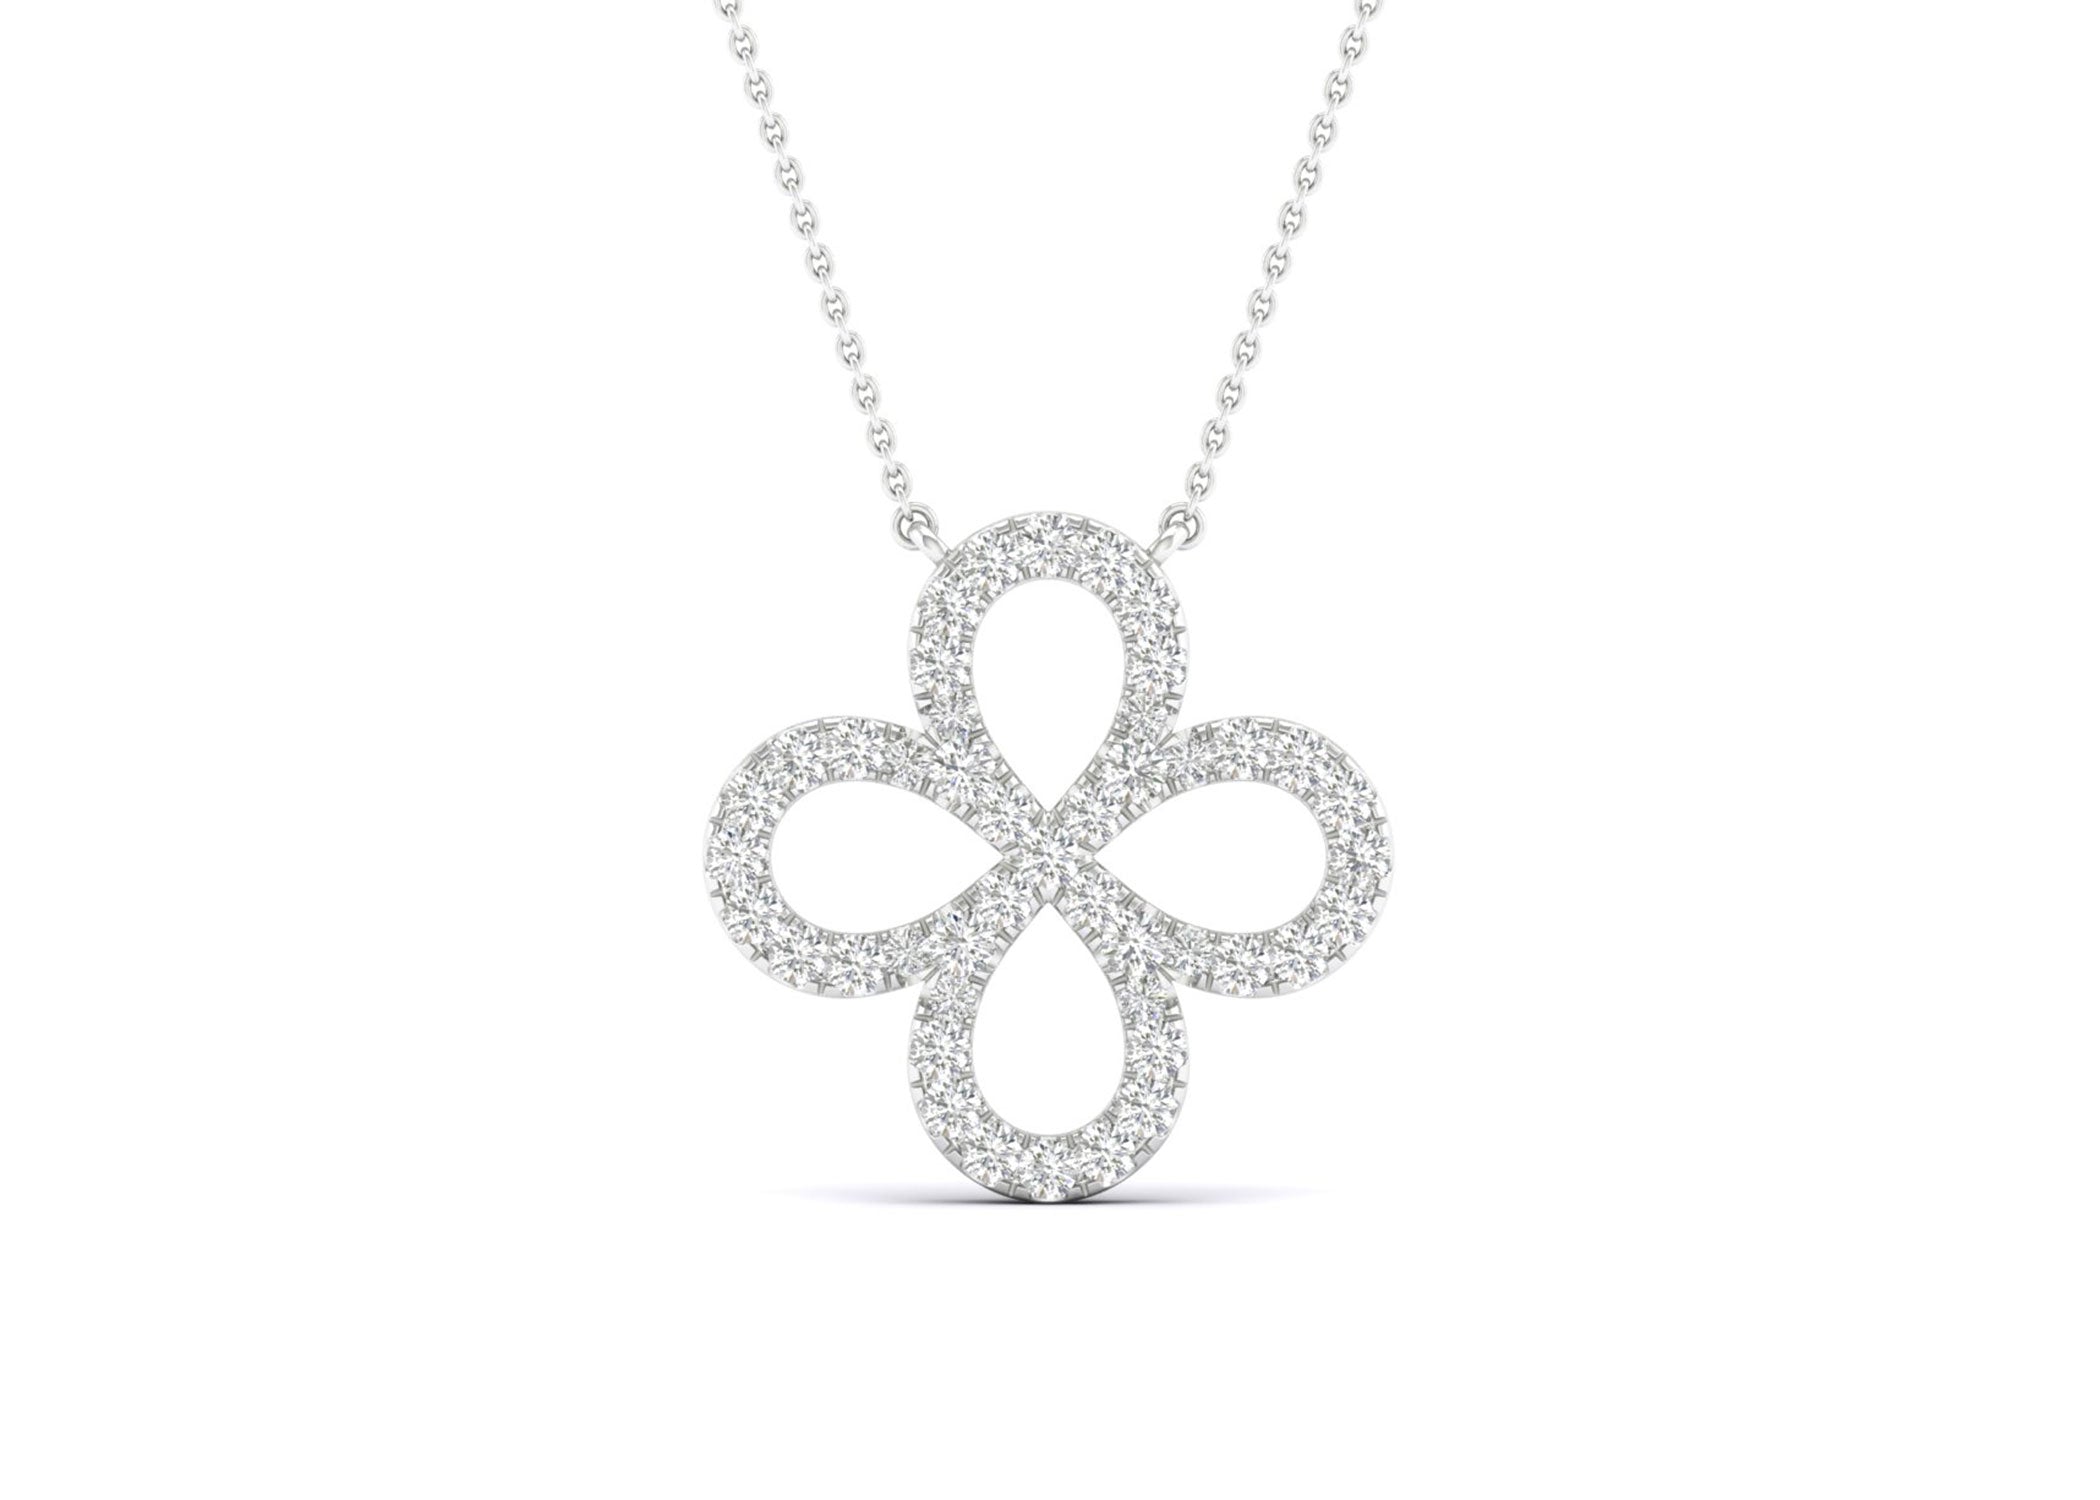 Infinity-Clover Silhouette Necklace - Necklace 